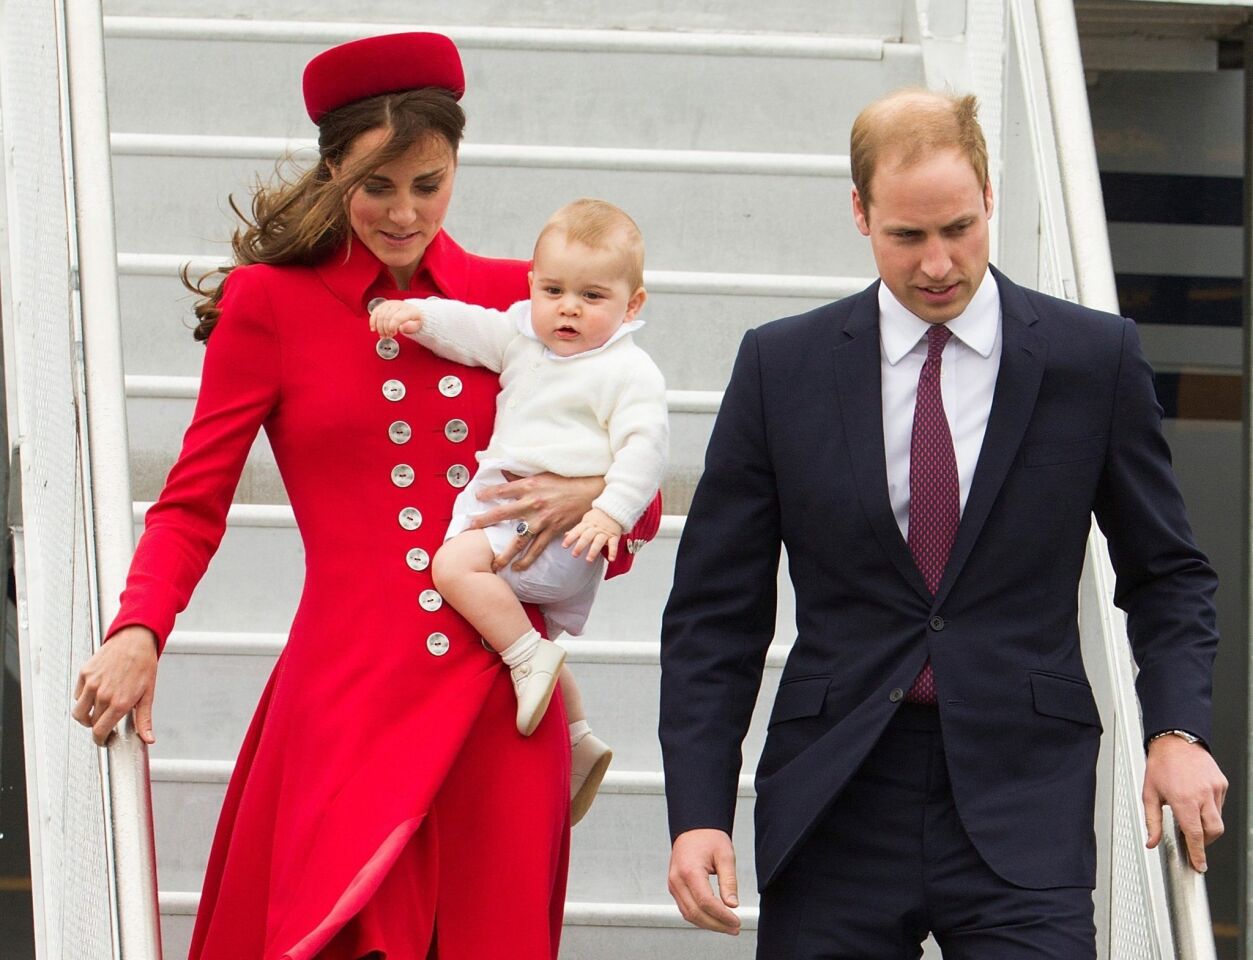 Prince William and Catherine arrive in Wellington, New Zealand, with their son Prince George. The family was scheduled to be New Zealand April 7-16. The duchess wears a scarlet Catherine Walker coat and a Gina Foster hat.